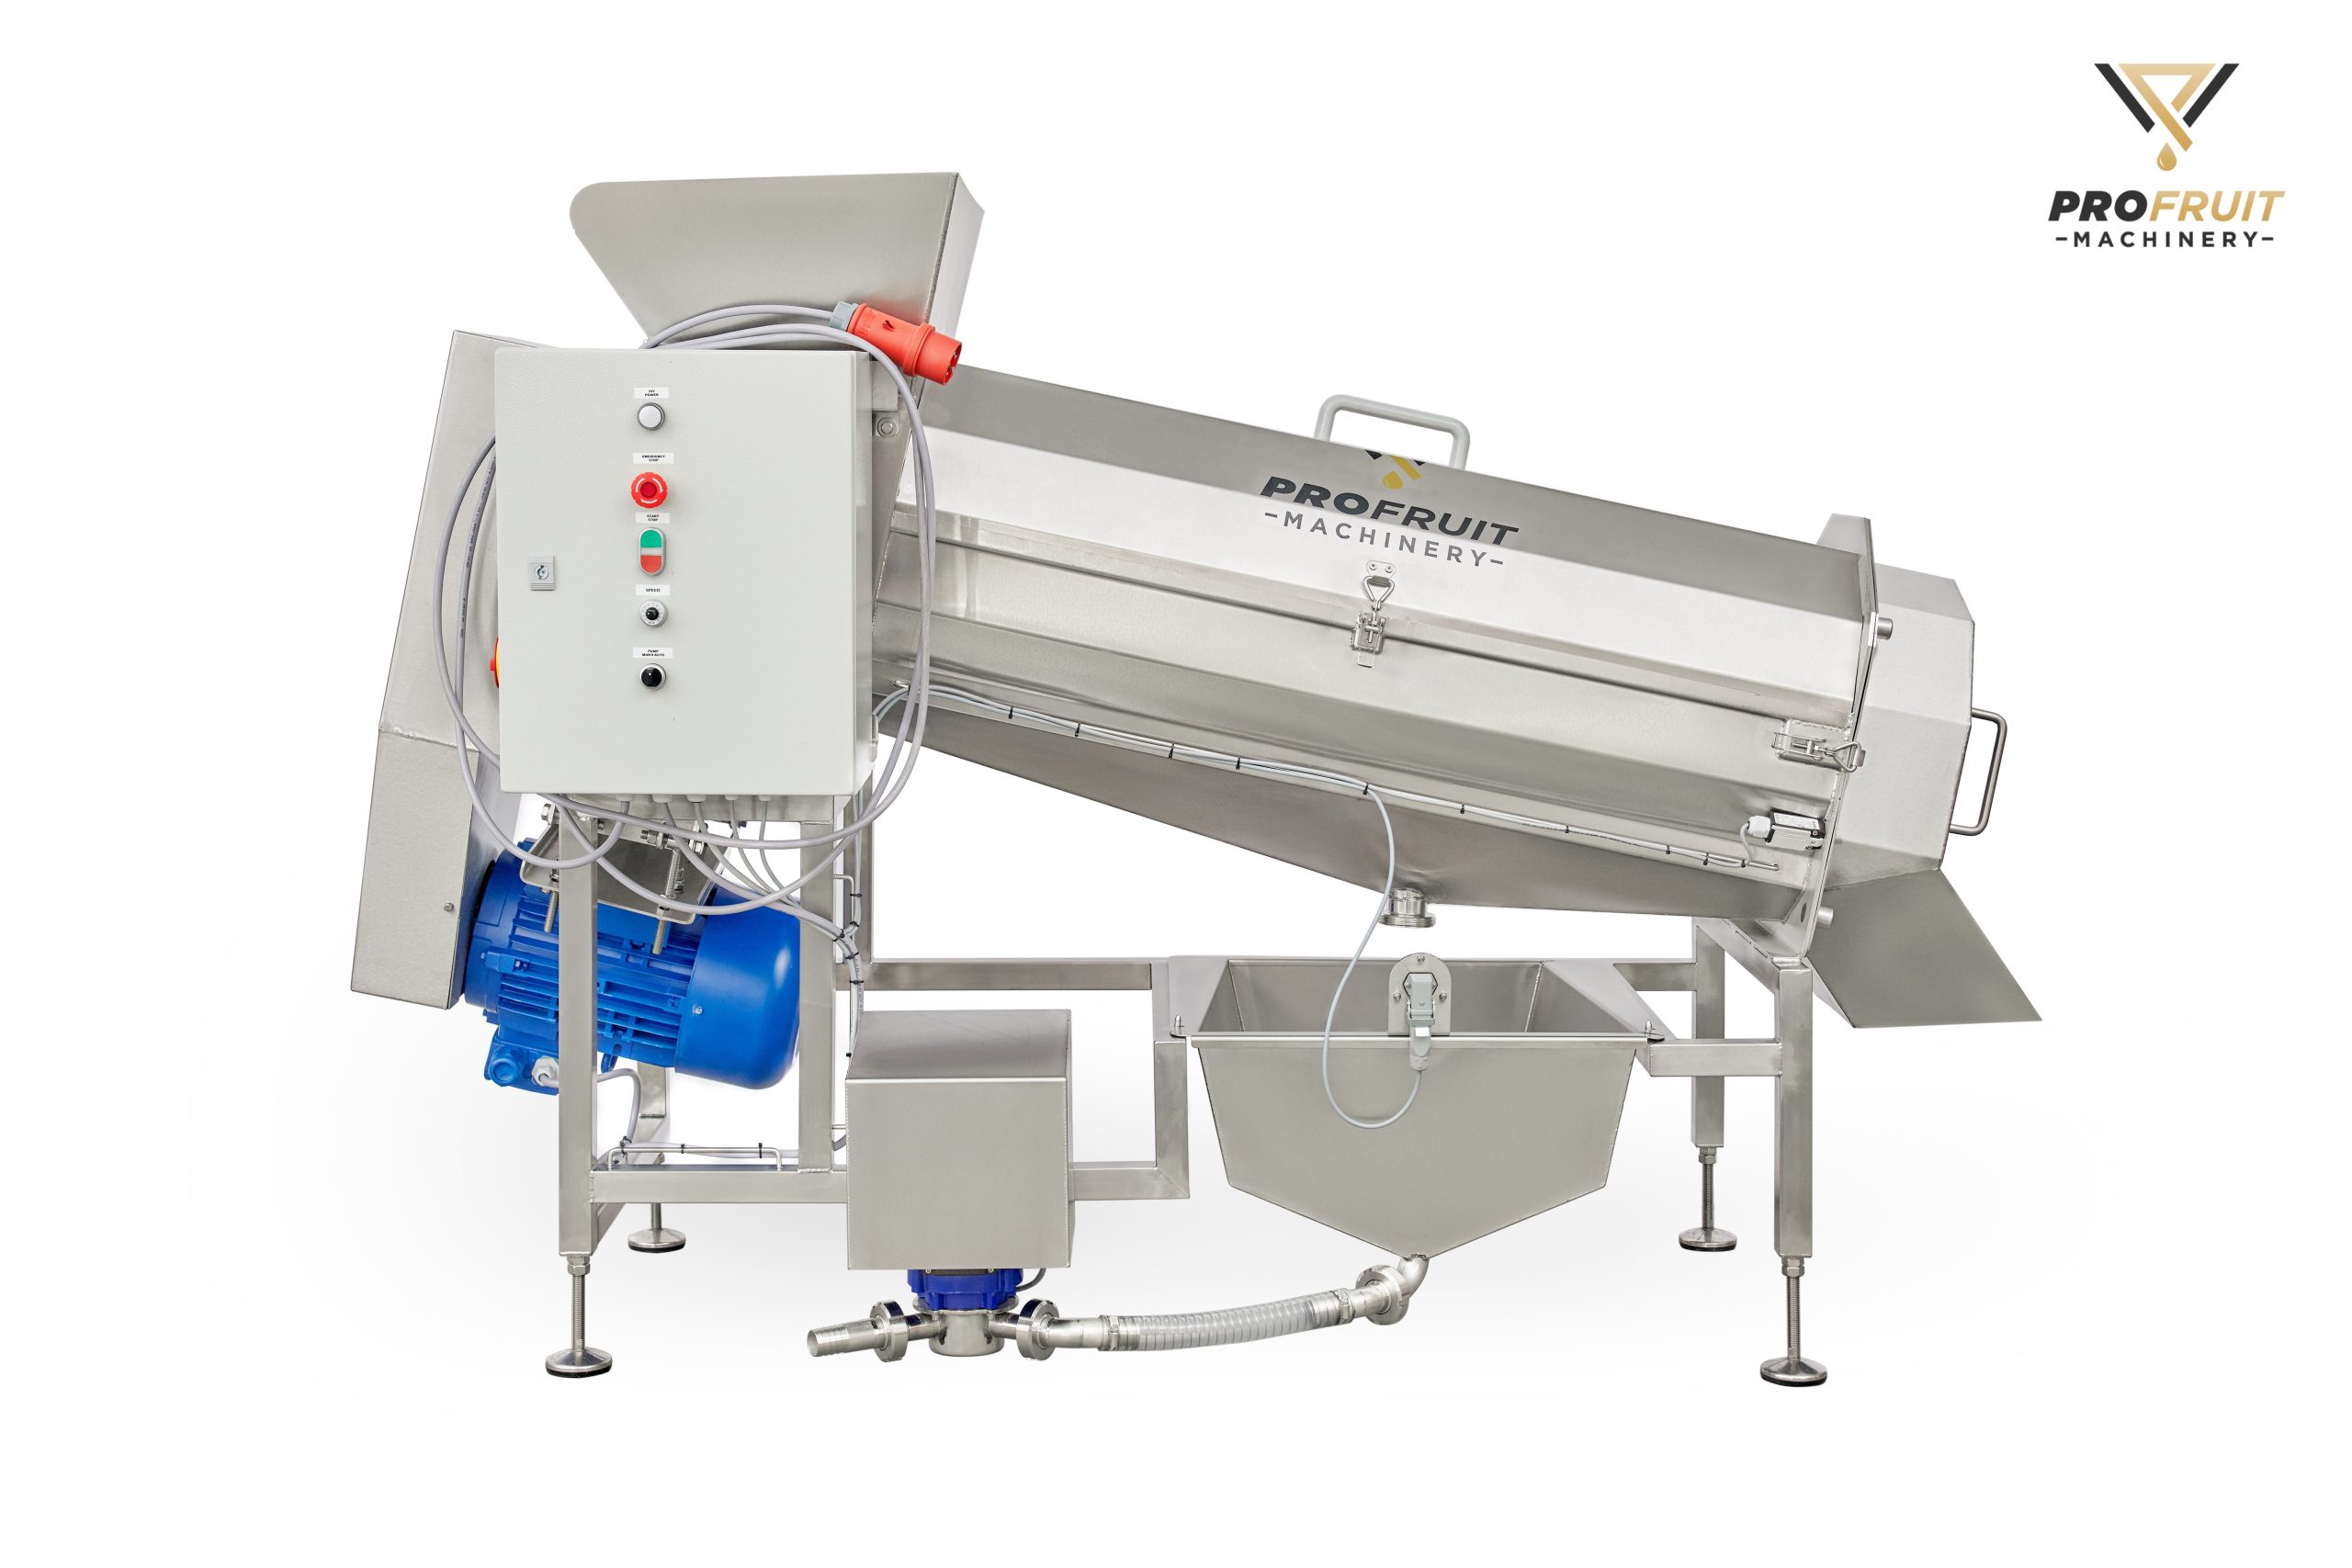 Destoning machine for pulping and producing juice